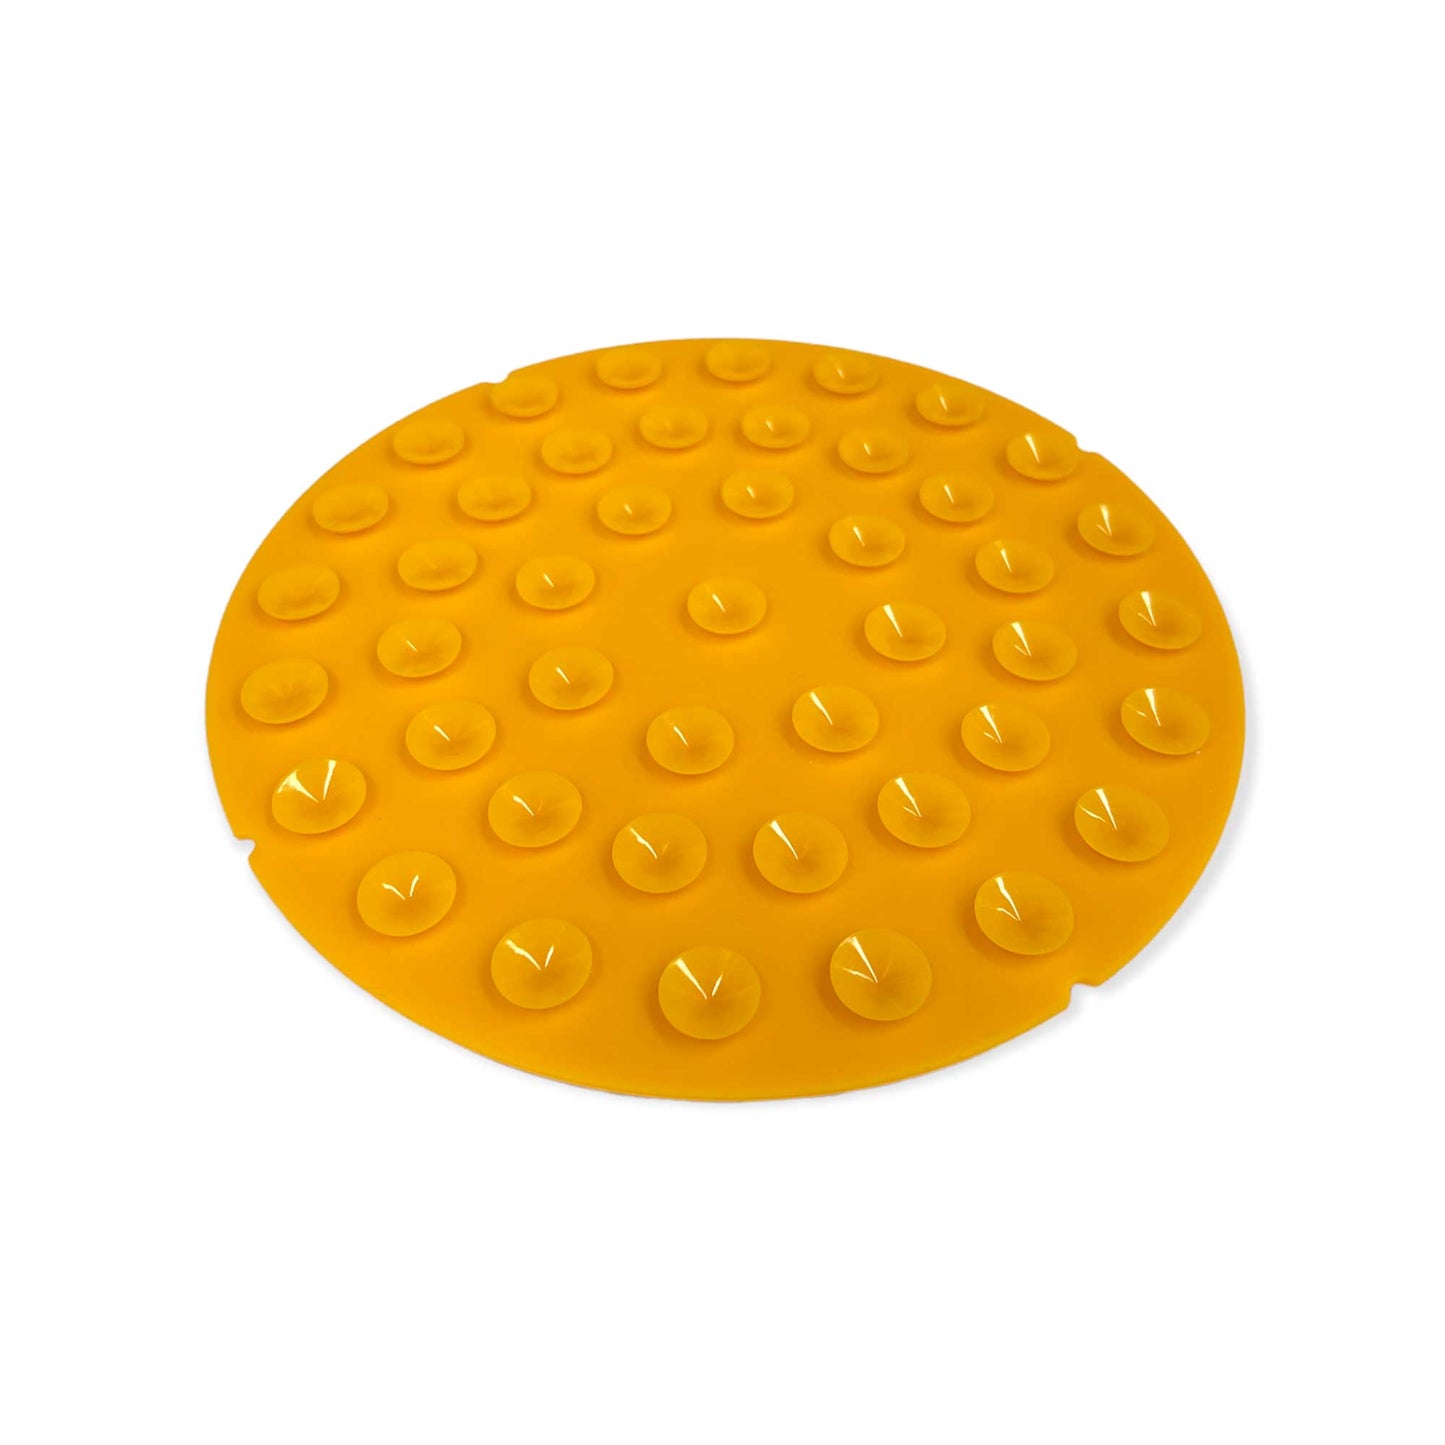 Dog Woofle Lick Mat - Food and Treat Sticky Slow Feeder Pad - Calming Toy